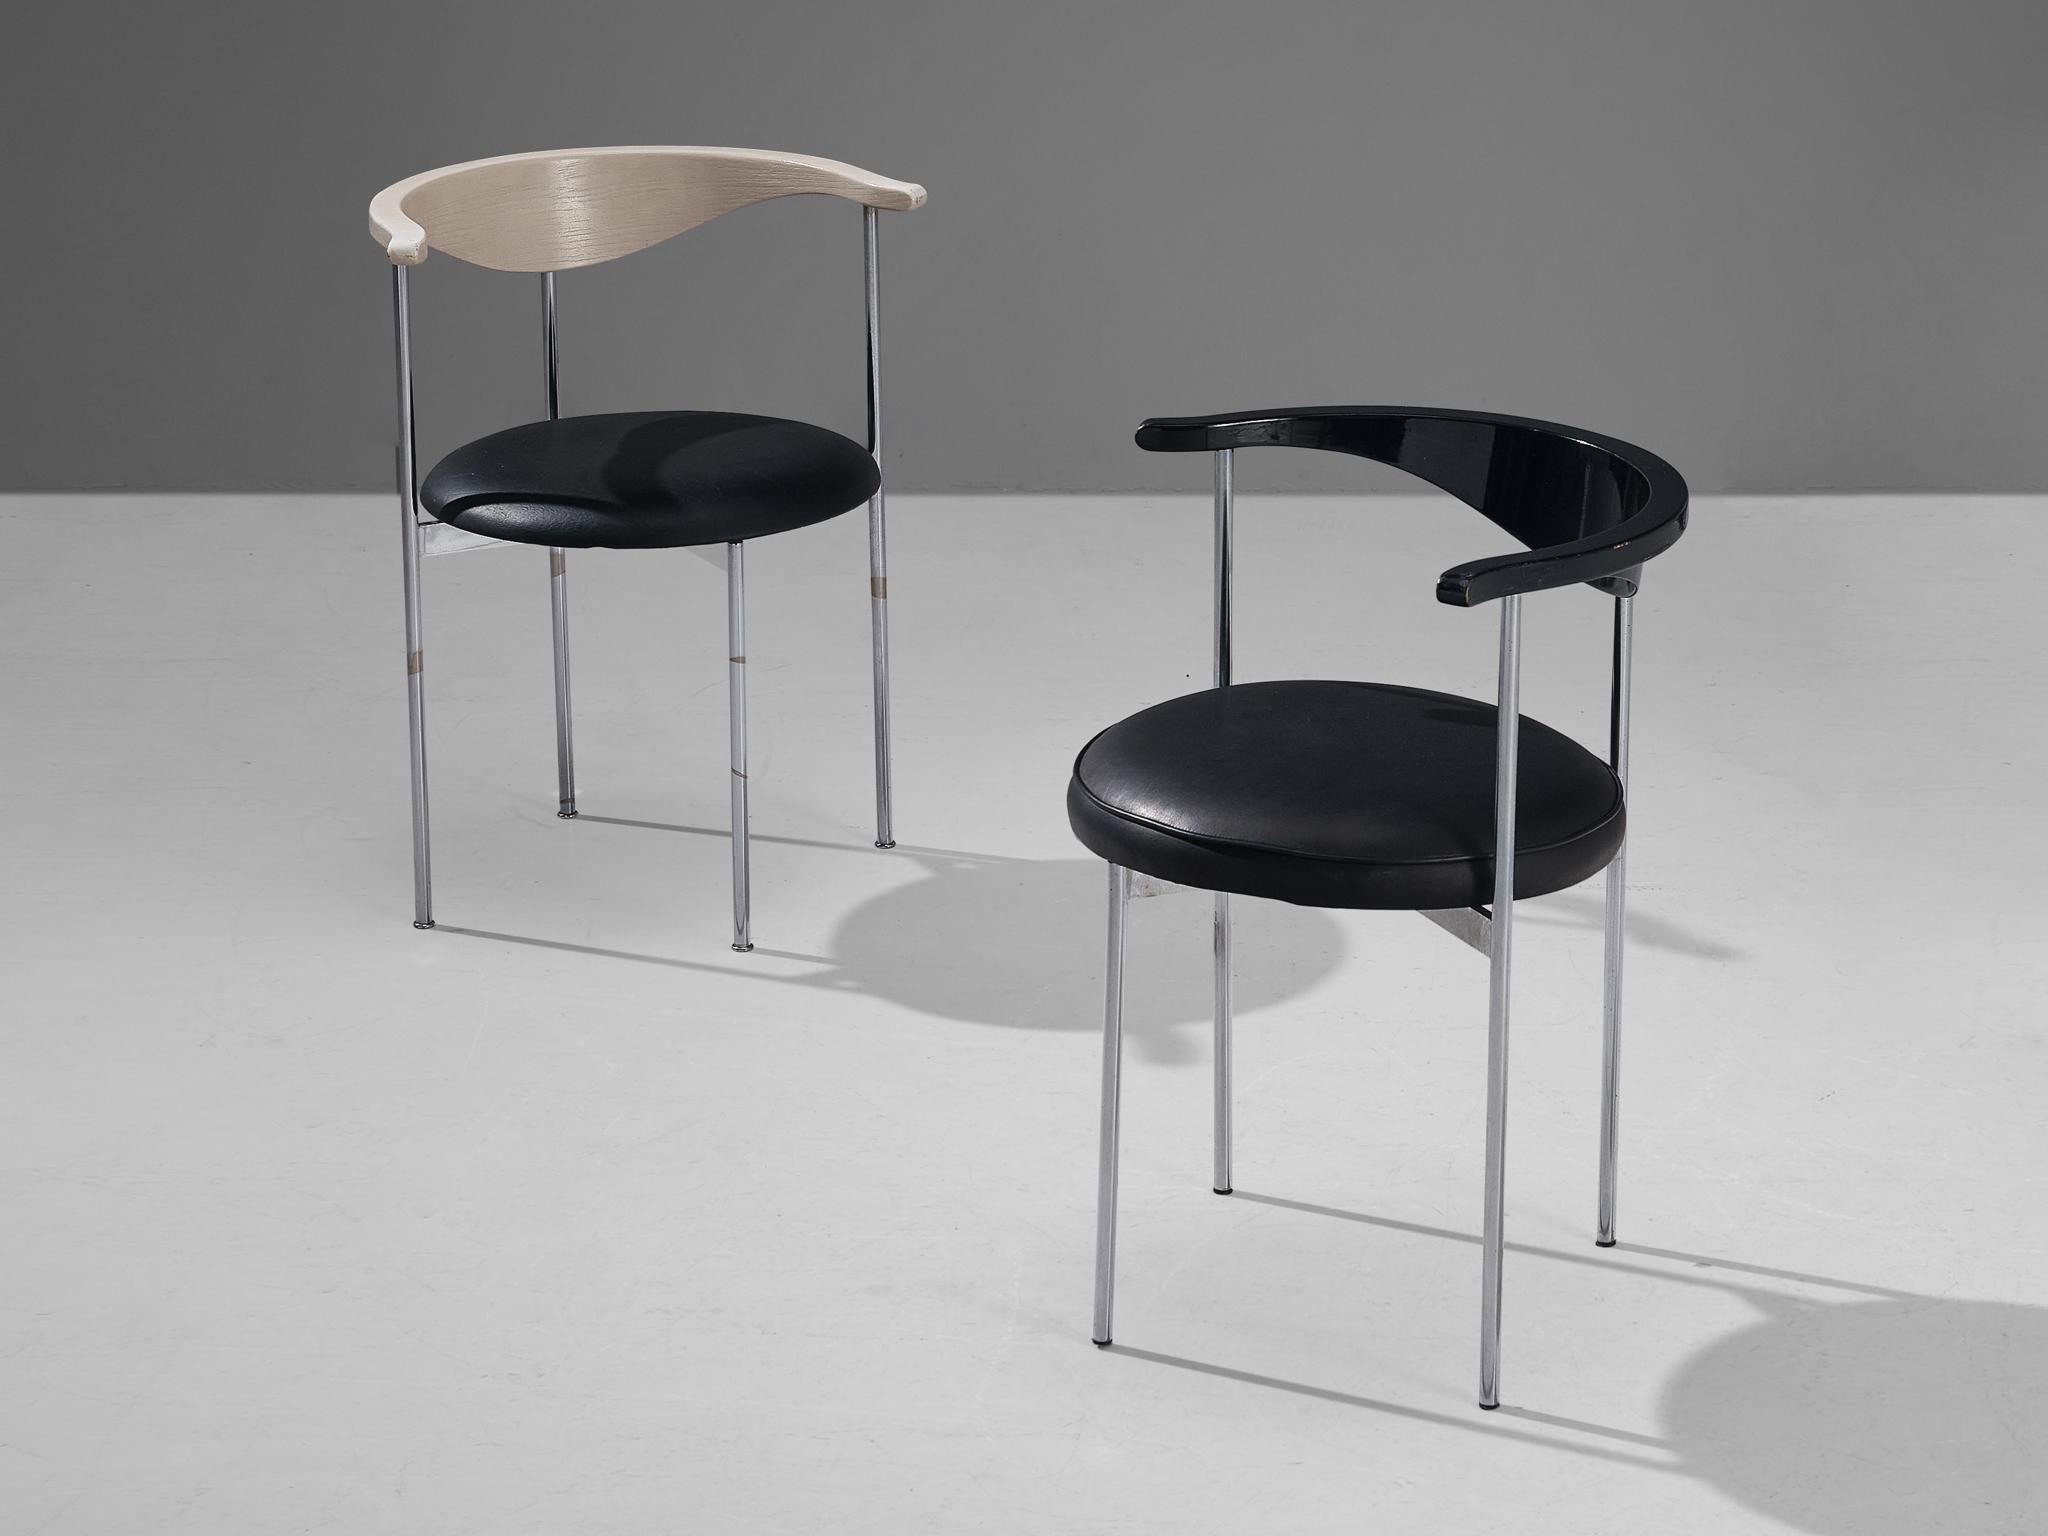 Frederik Sieck for Fritz Hansen, pair of chairs model 3200, skai, black and white painted wood, metal, Denmark, design 1962, production 1967. 

This industrial clear pair of the model 3200 chairs was designed by the Swedish designer Sieck for Fritz